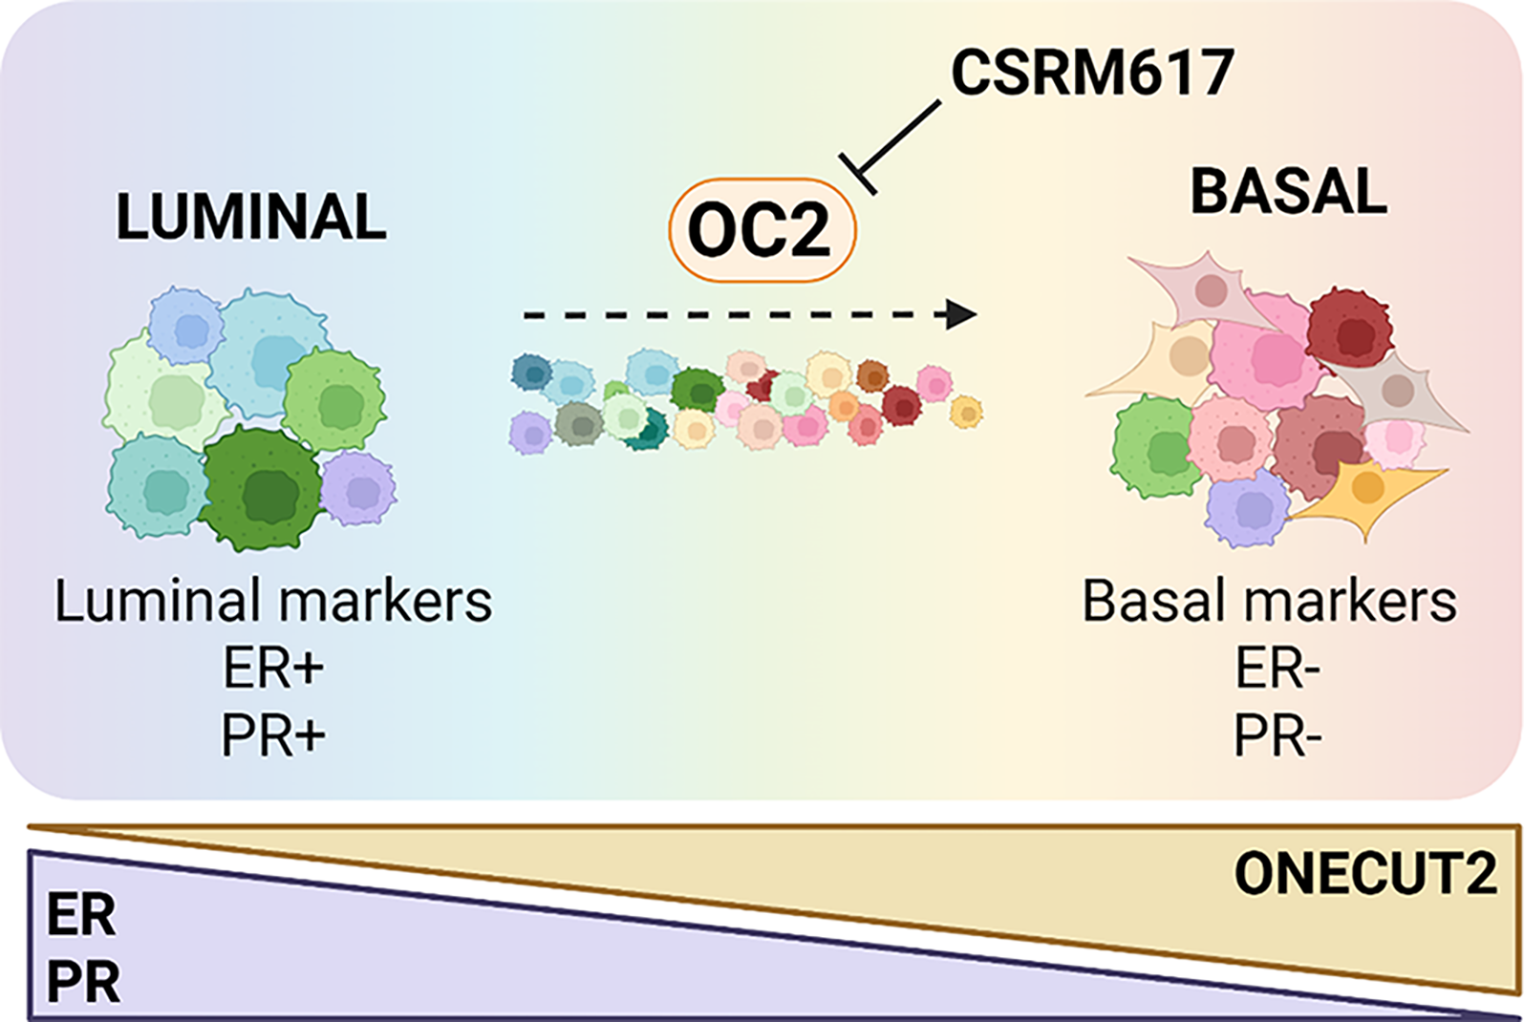 ONECUT2 is a druggable driver of luminal to basal breast cancer plasticity